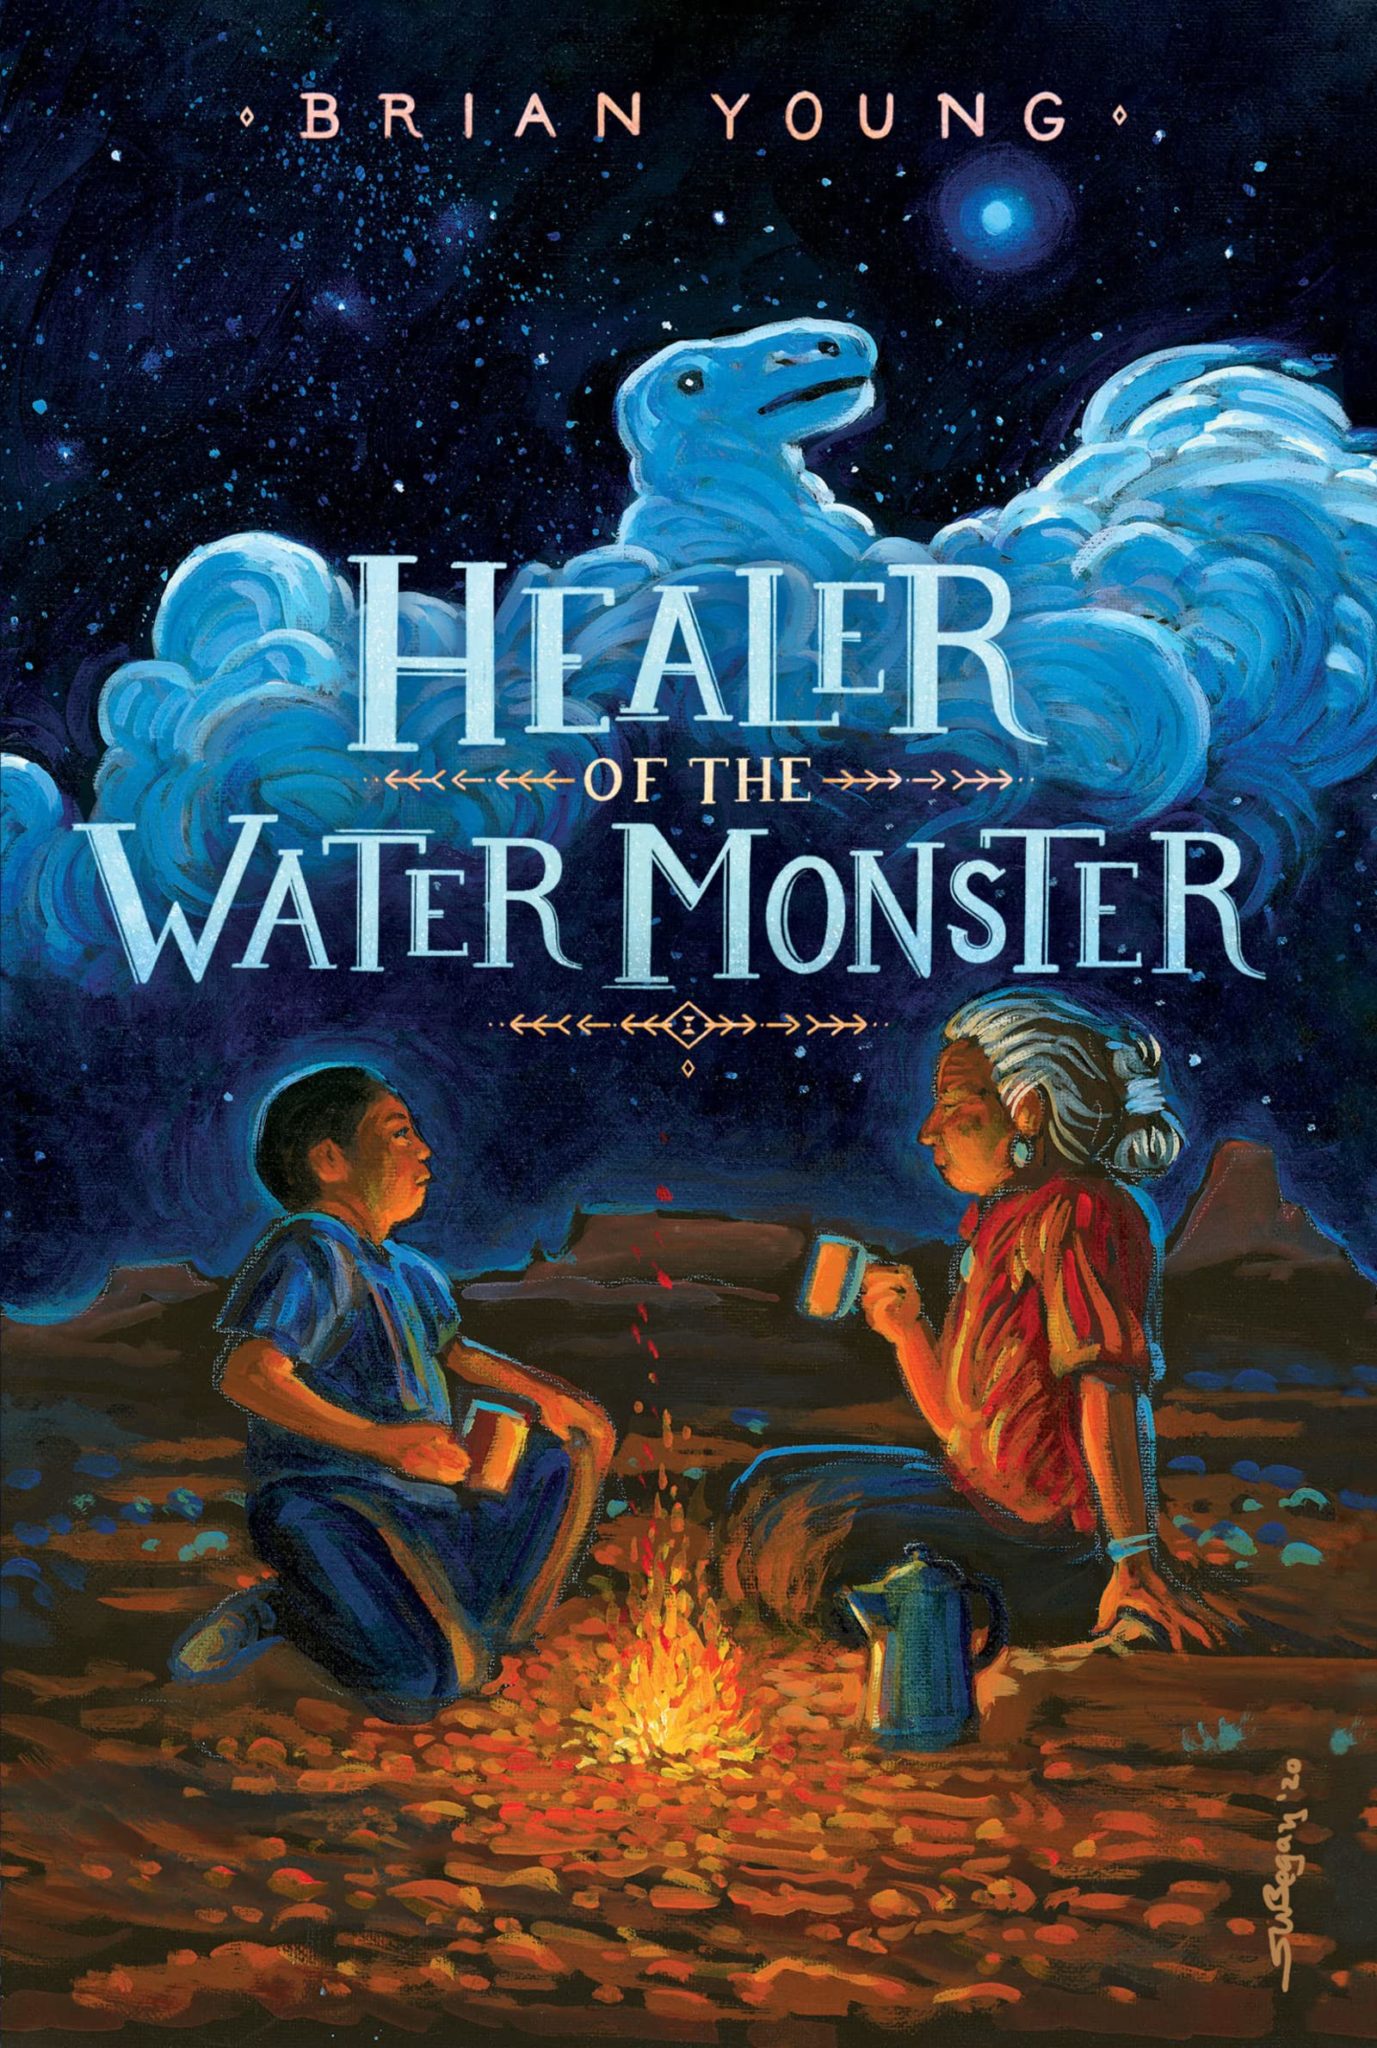 The cover of the book "Healer of the Water Monster" features a painting of a young Navajo boy and his grandmother seated on the desert ground at night. They hold mugs and talk around a campfire. In the sky, the clouds appear to form the shape of a water monster. 